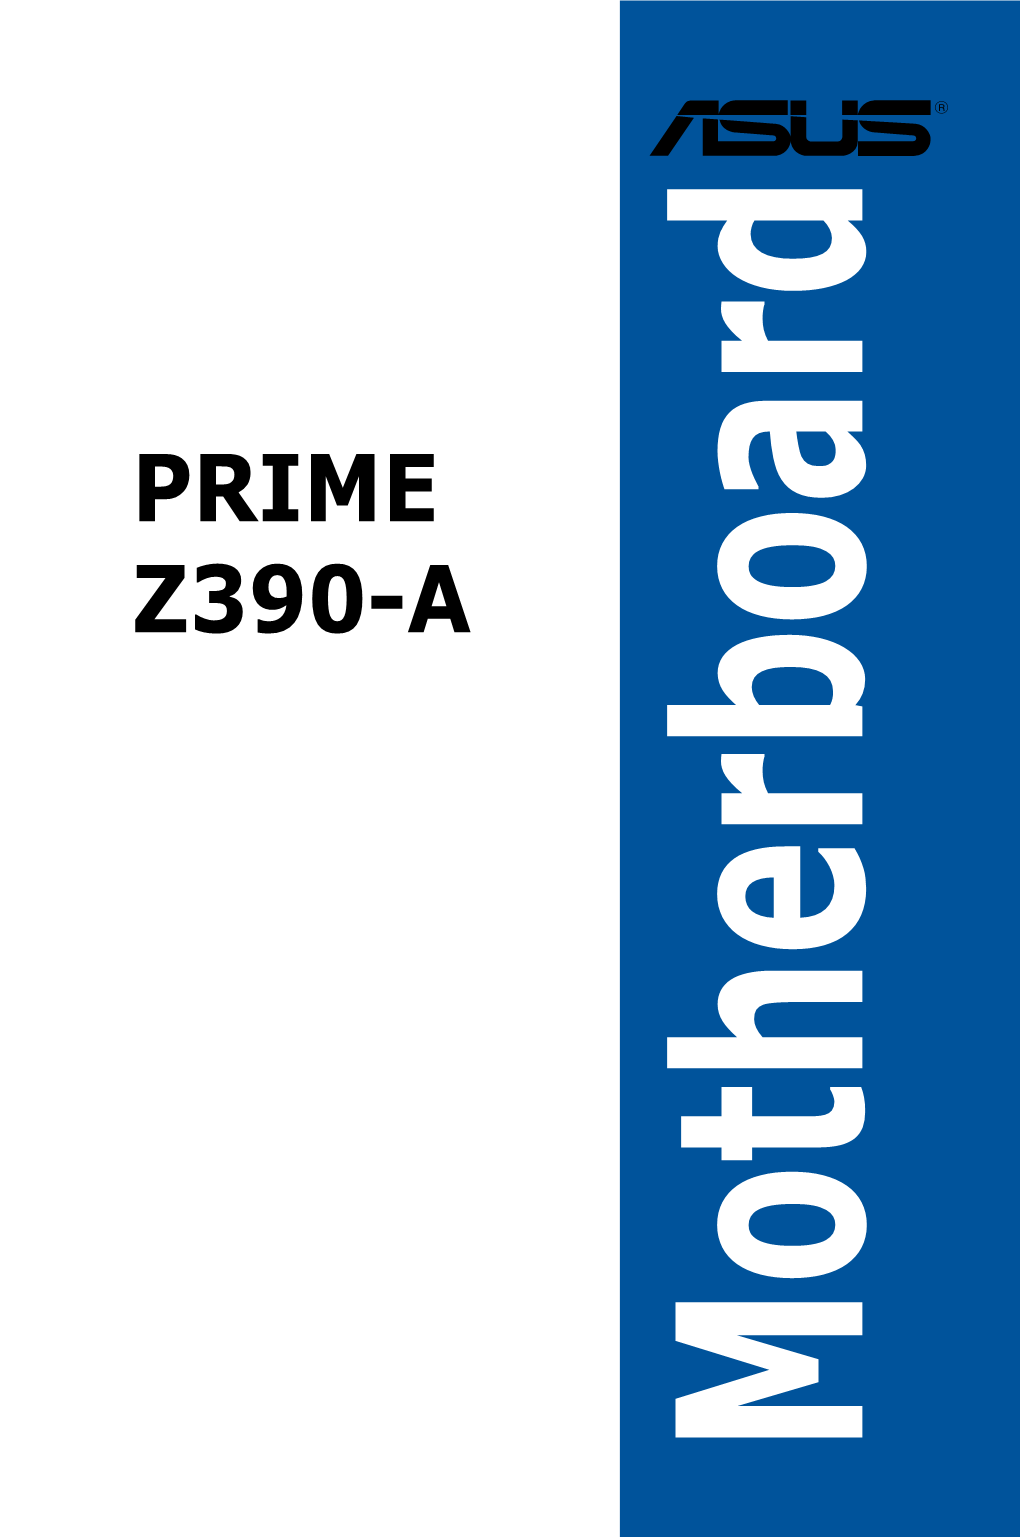 PRIME Z390-A Specifications Summary